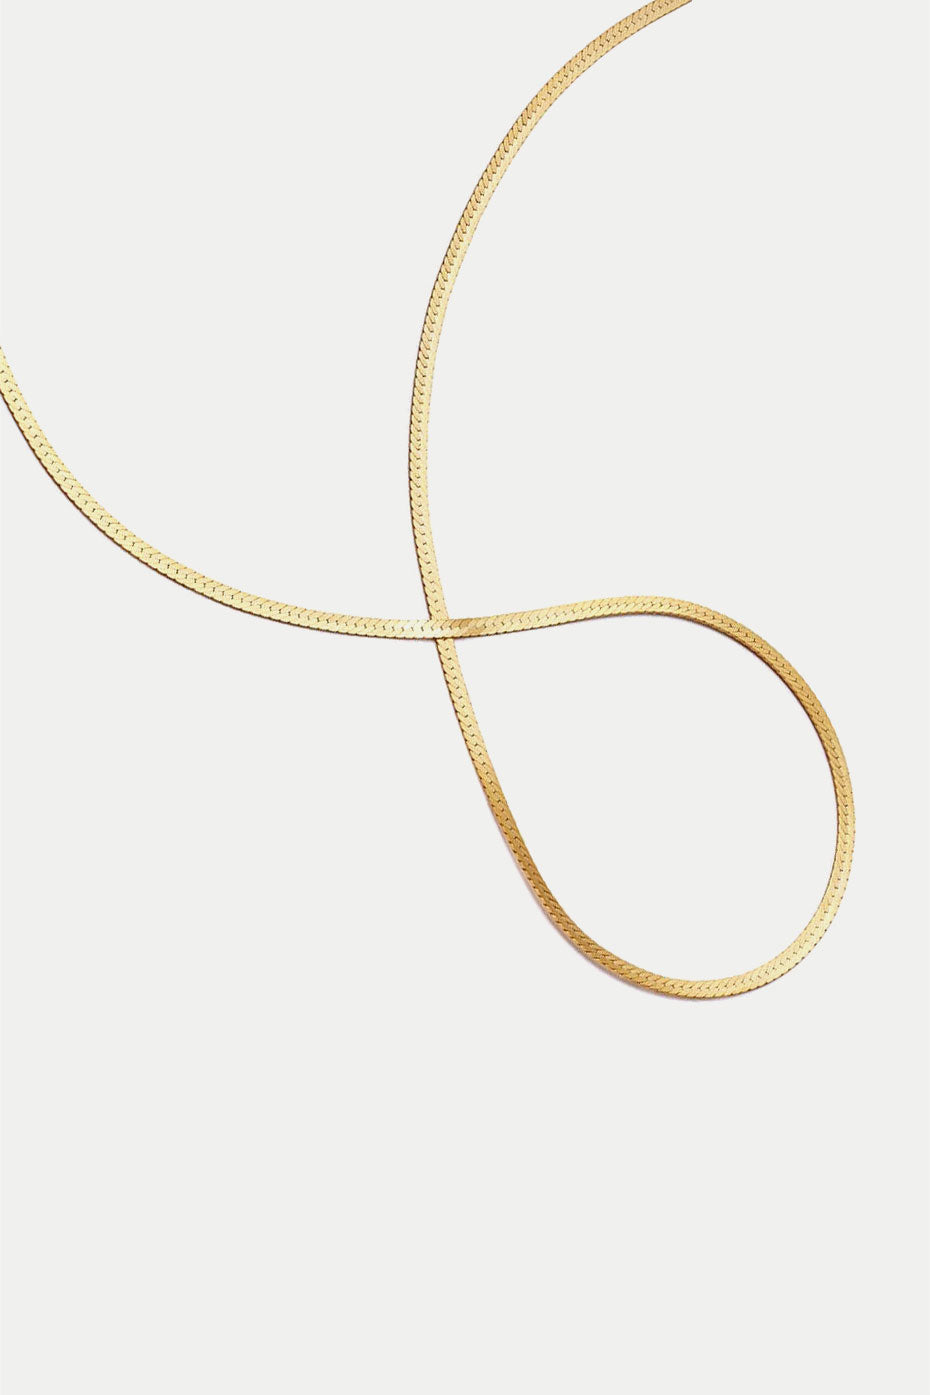 Daisy London Gold Plated Fine Snake Chain Necklace